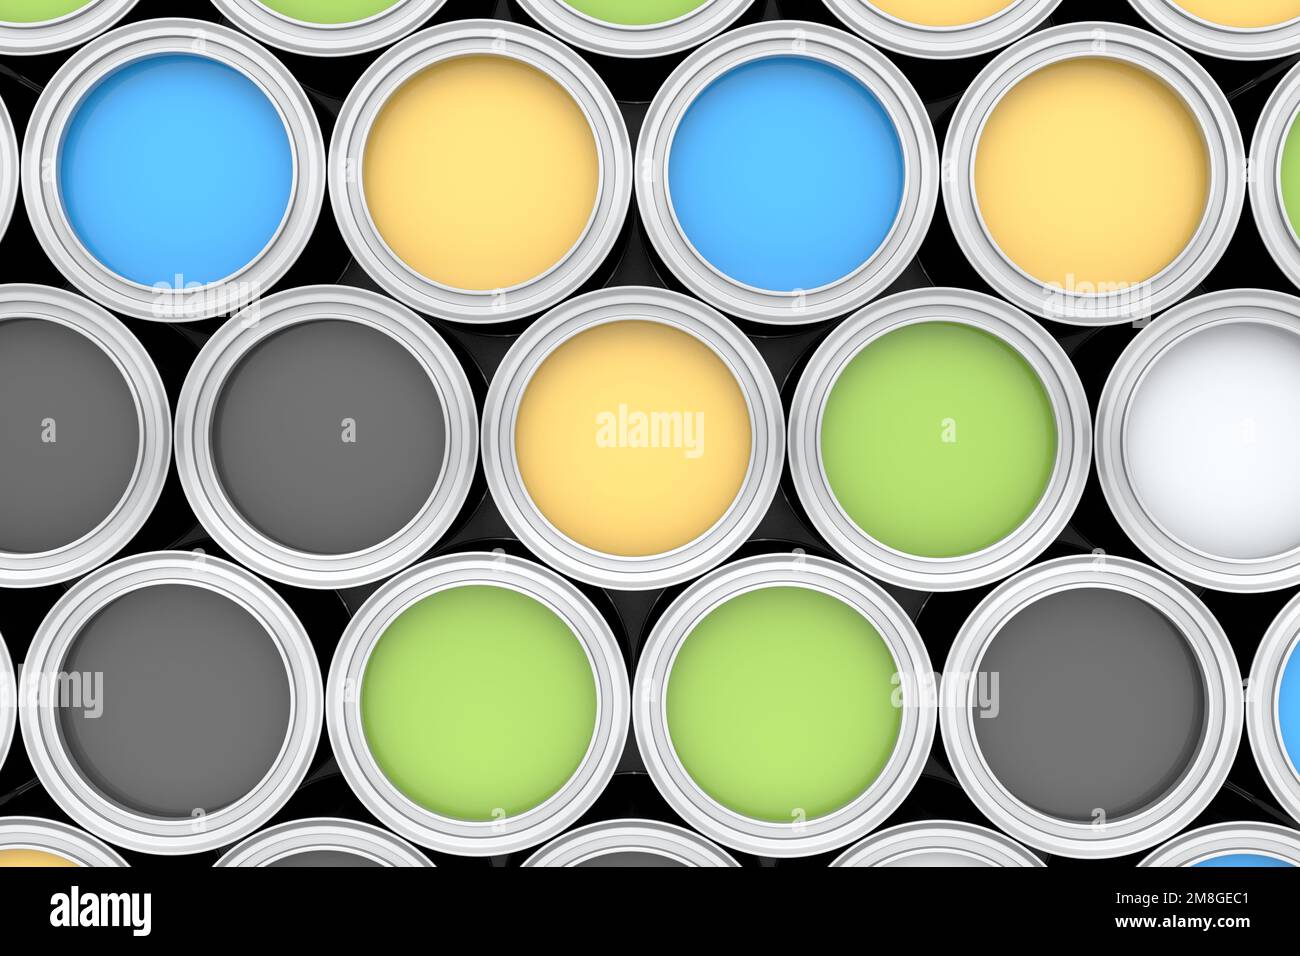 Multi color paint containers Stock Photo - Alamy